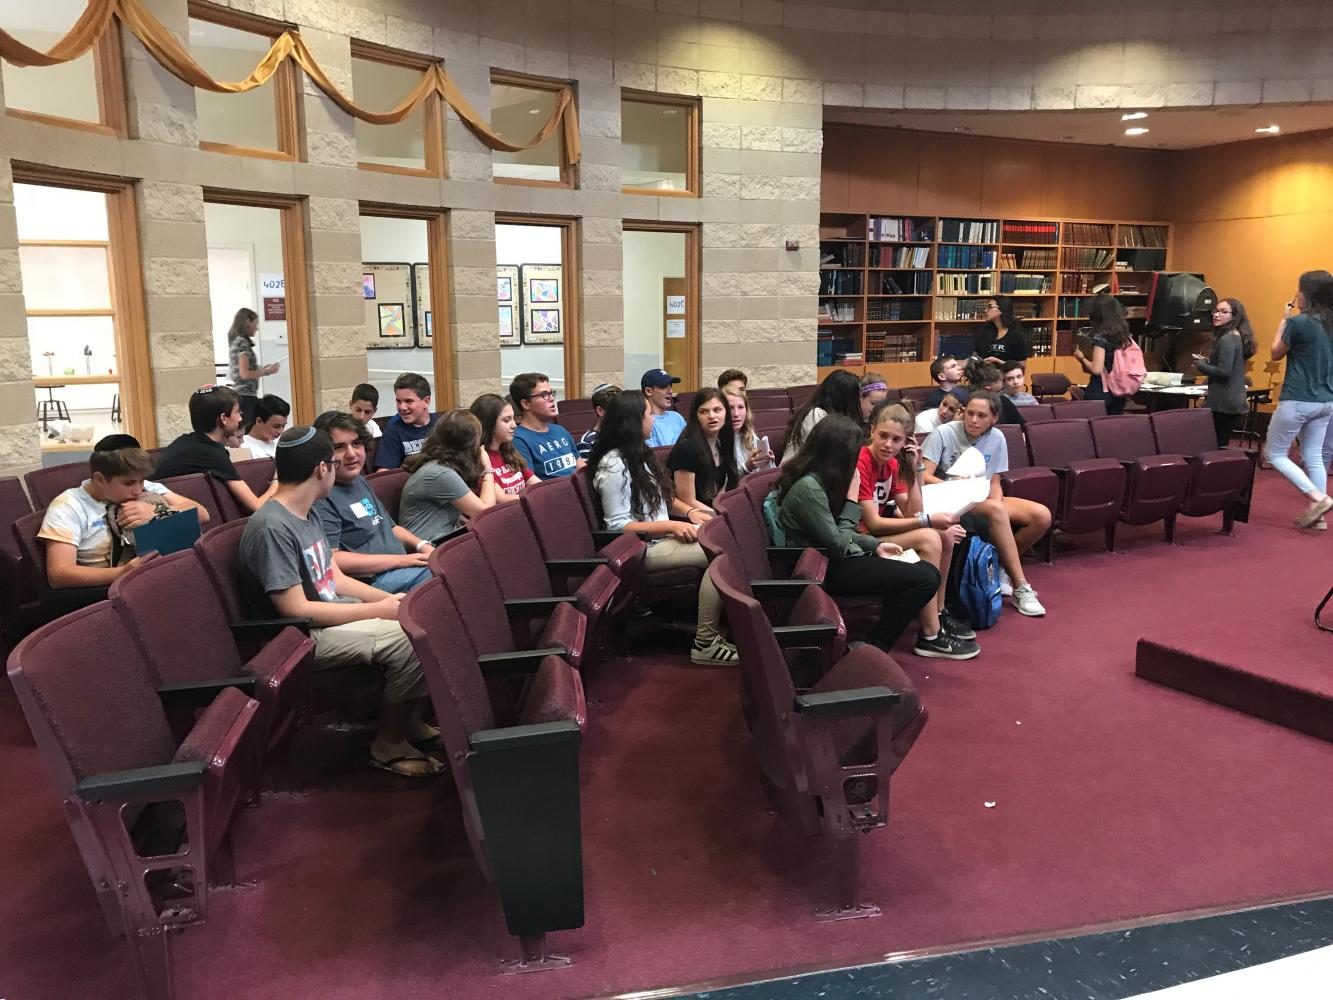 New students and their buddies gather in the Beit Midrash to begin their orientation activities. The student buddy system allows new students to adjust socially.
